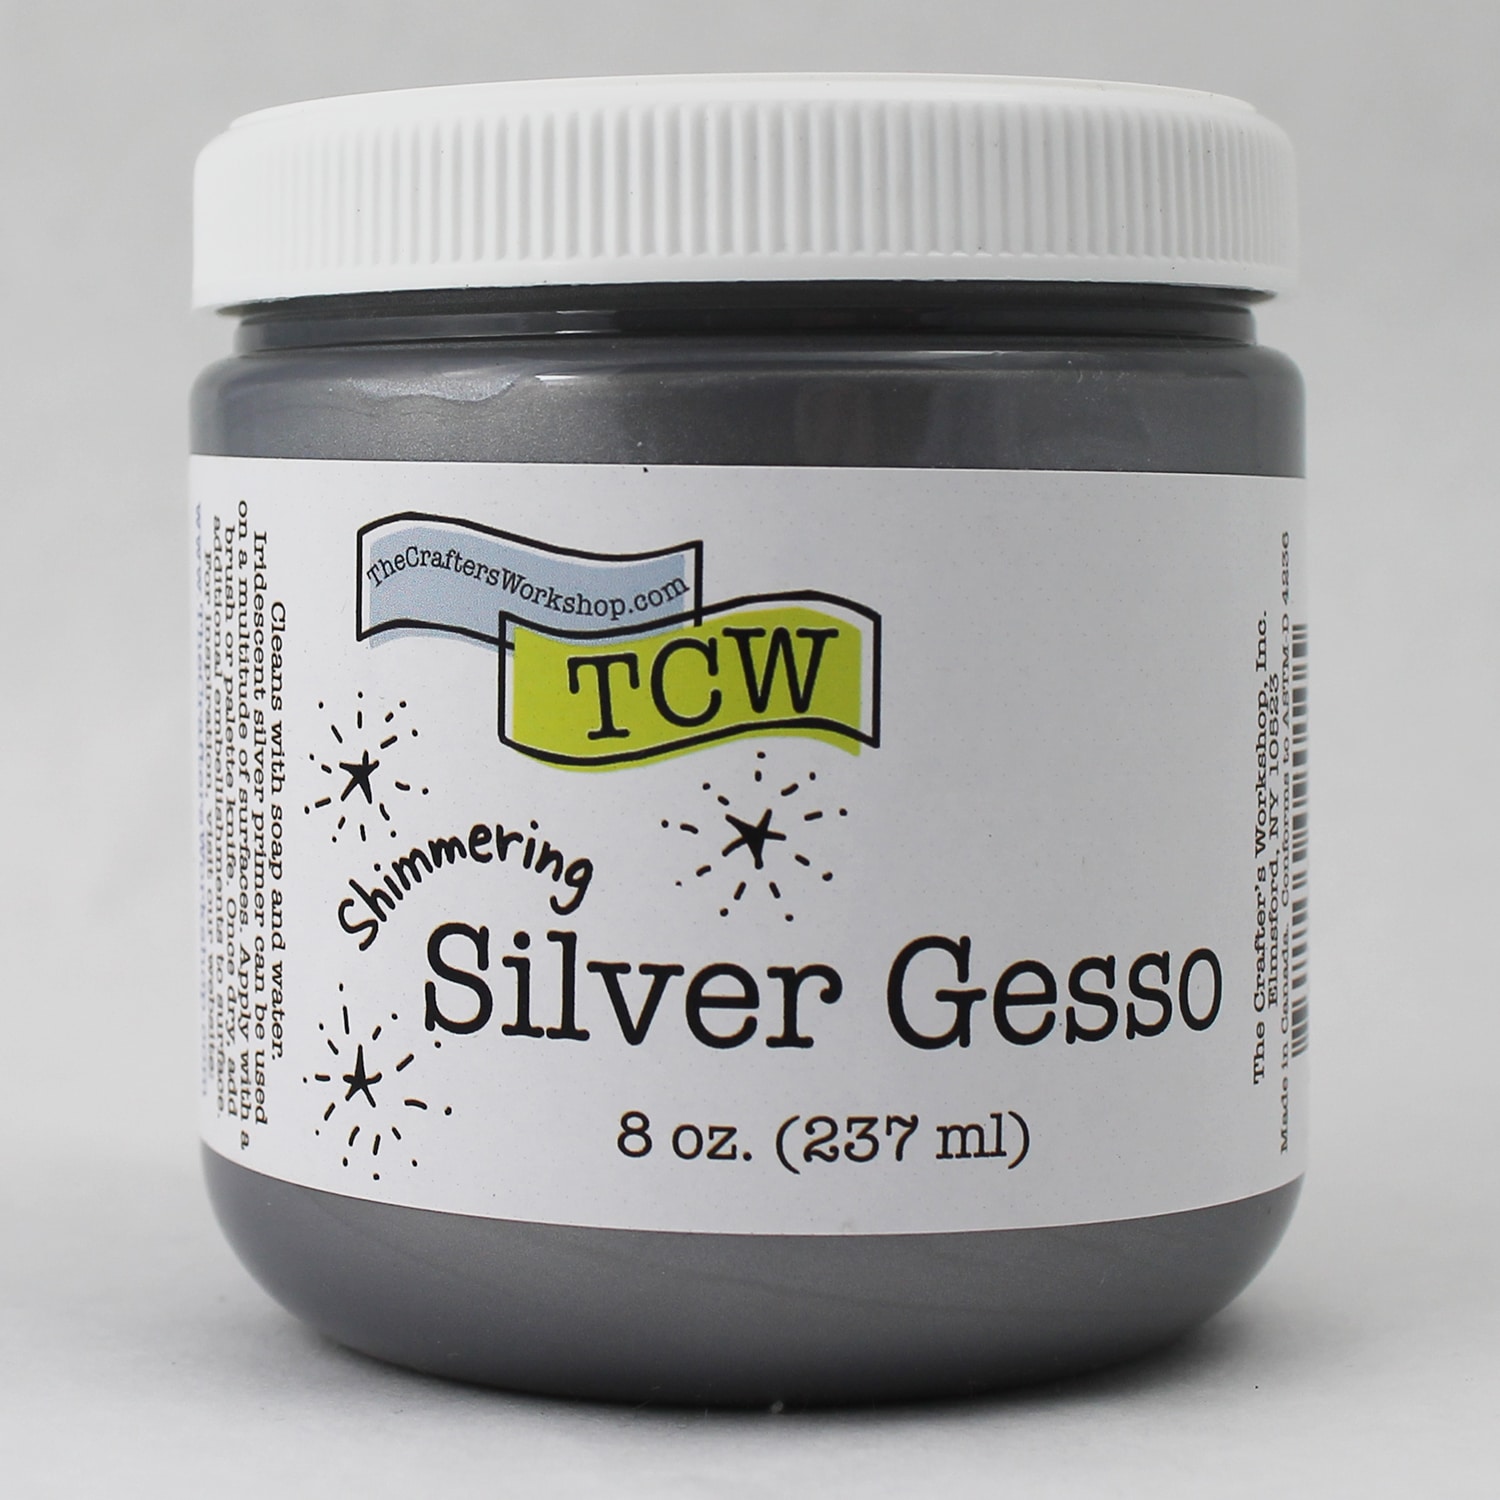 TCW9008 Clear Modeling Paste 8 oz.